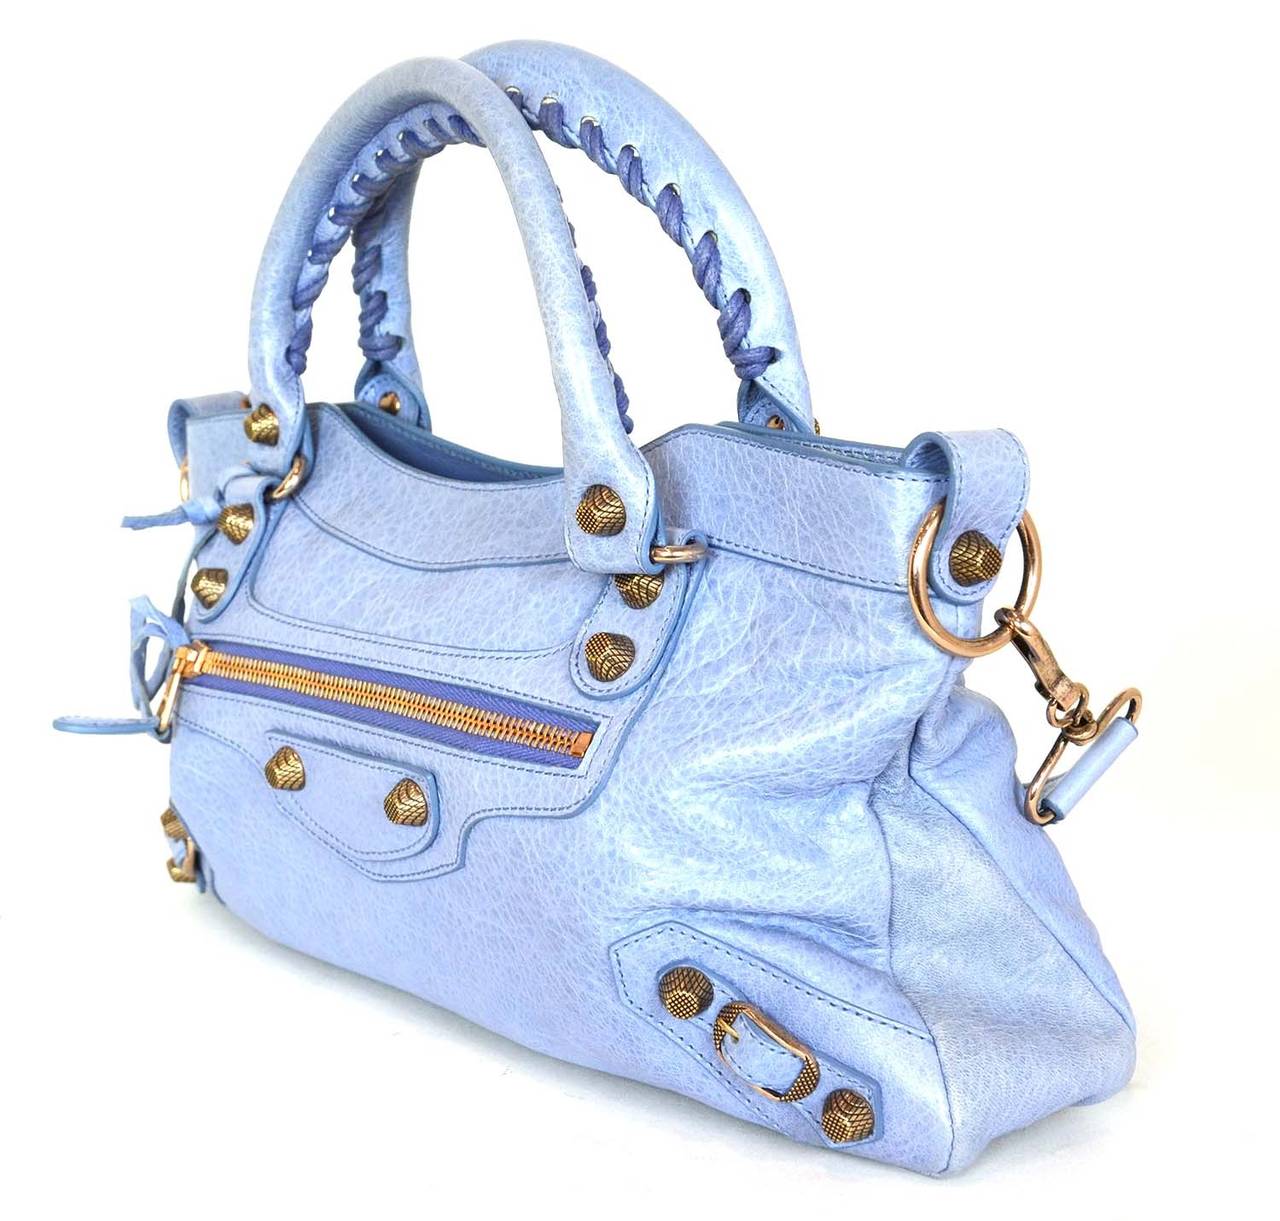 BALENCIAGA Periwinkle First Motorcycle Bag
This classic Balenciaga bag can be worn using only the top handles in the crook of the arm or with the removable strap at the shoulder.

    Made in: Italy
    Color: Periwinkle
    Materials: